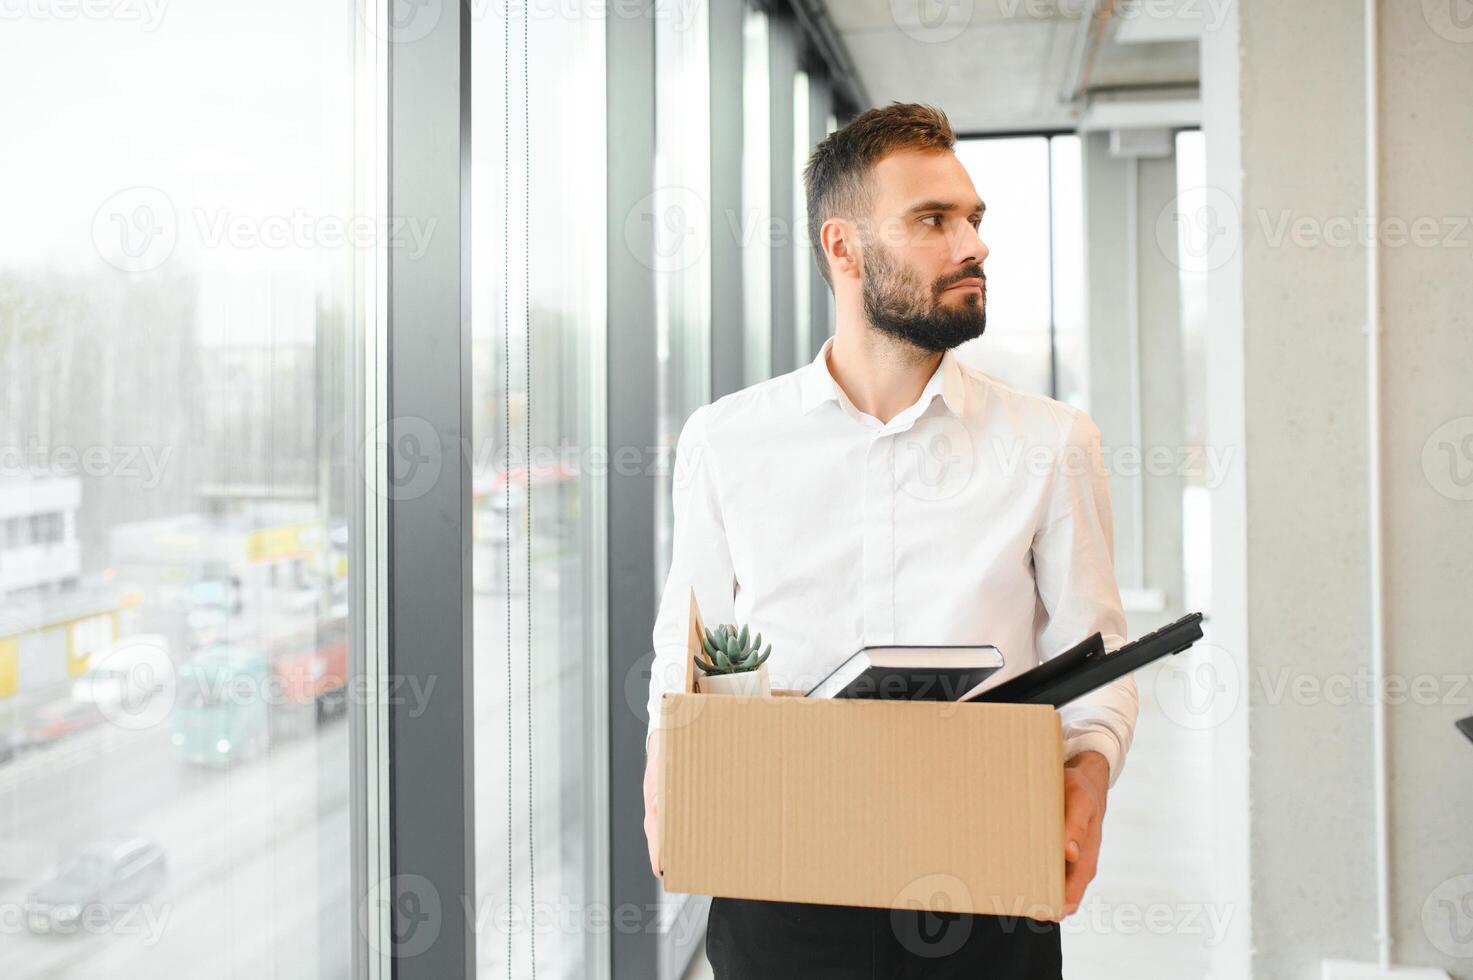 Sad Fired. Let Go Office Worker Packs His Belongings into Cardboard Box and Leaves Office. Workforce Reduction, Downsizing, Reorganization, Restructuring, Outsourcing. Mass Unemployment Market Crisis photo